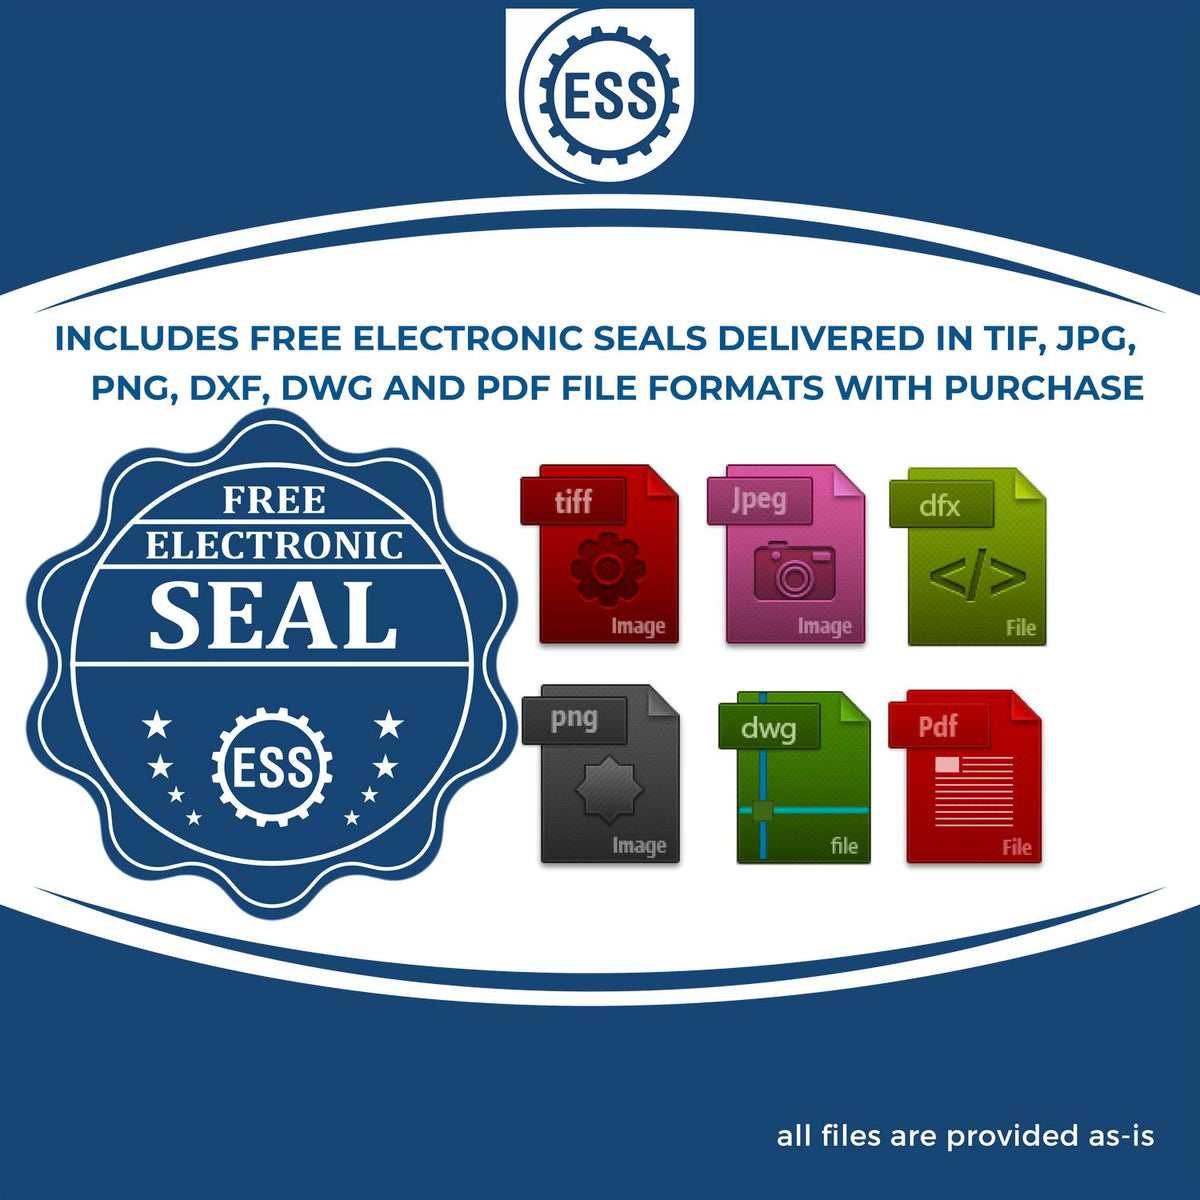 An infographic for the free electronic seal for the State of Maine Long Reach Architectural Embossing Seal illustrating the different file type icons such as DXF, DWG, TIF, JPG and PNG.